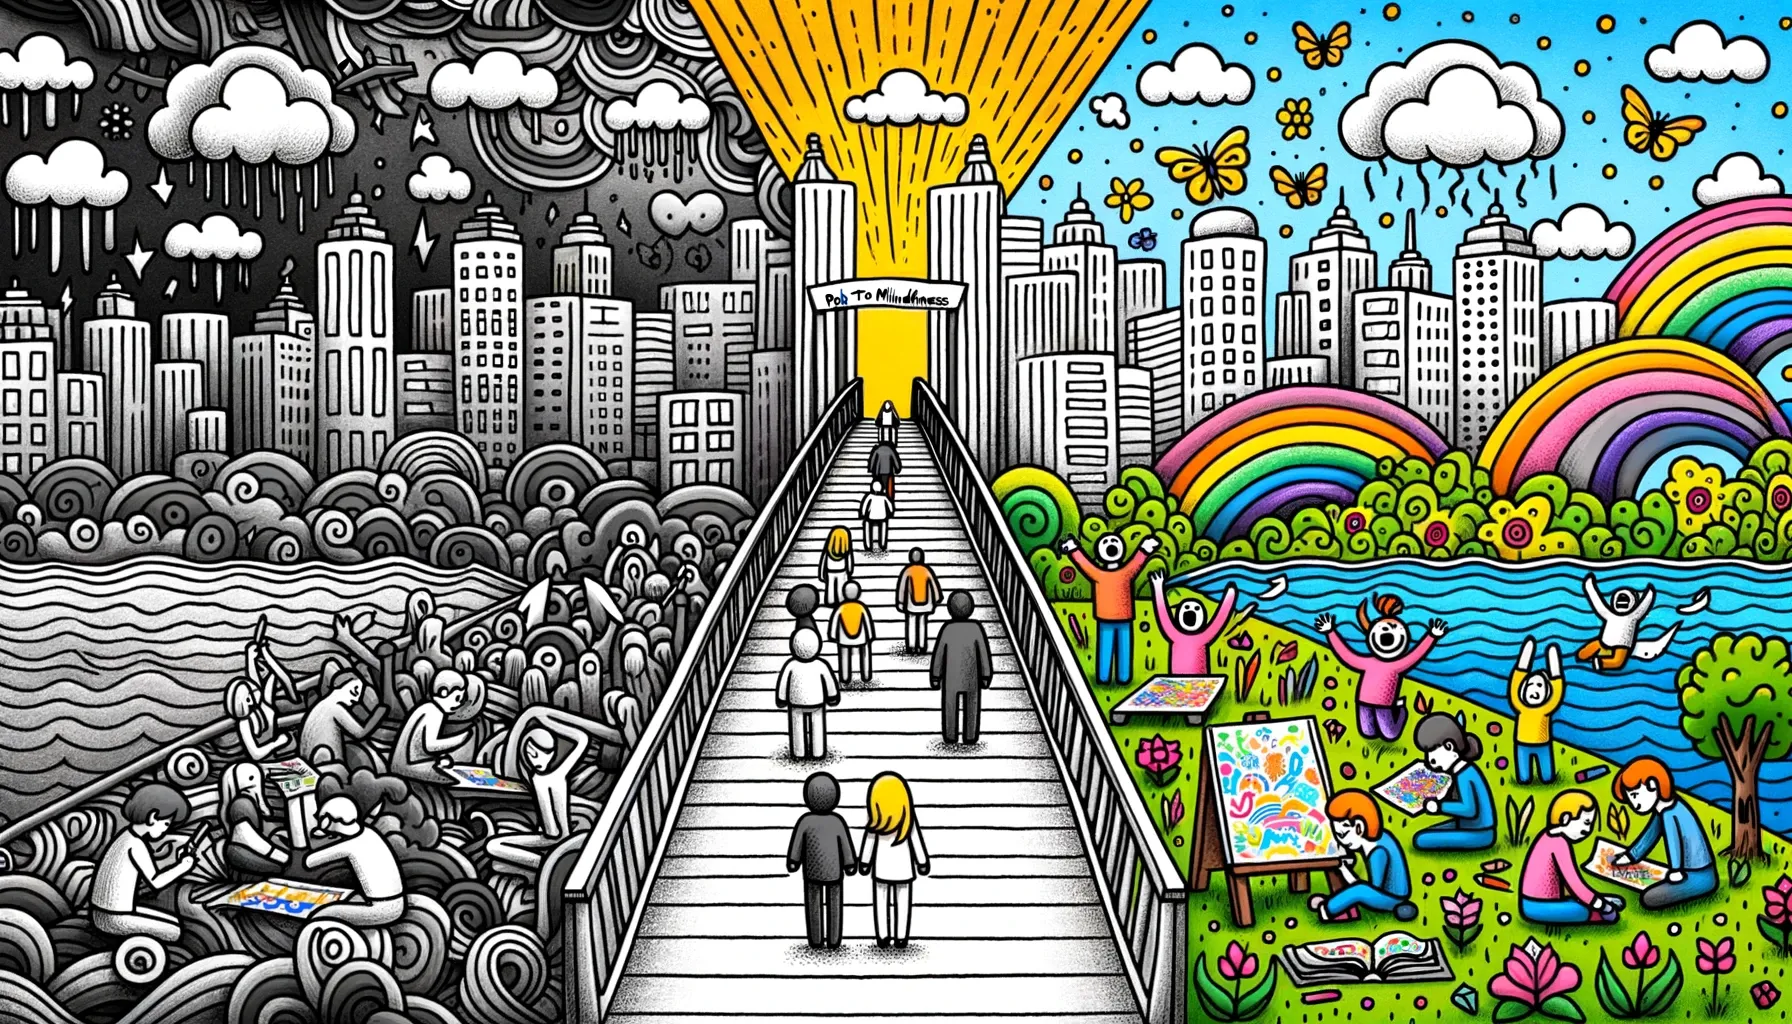 Wide doodle illustration: A depiction of two worlds side by side. On the left, a grayscale city with stressed people. A bridge connects to the right side, where the world is colorful and filled with adults joyfully coloring. The sign on the bridge reads 'Path to Mindfulness'.